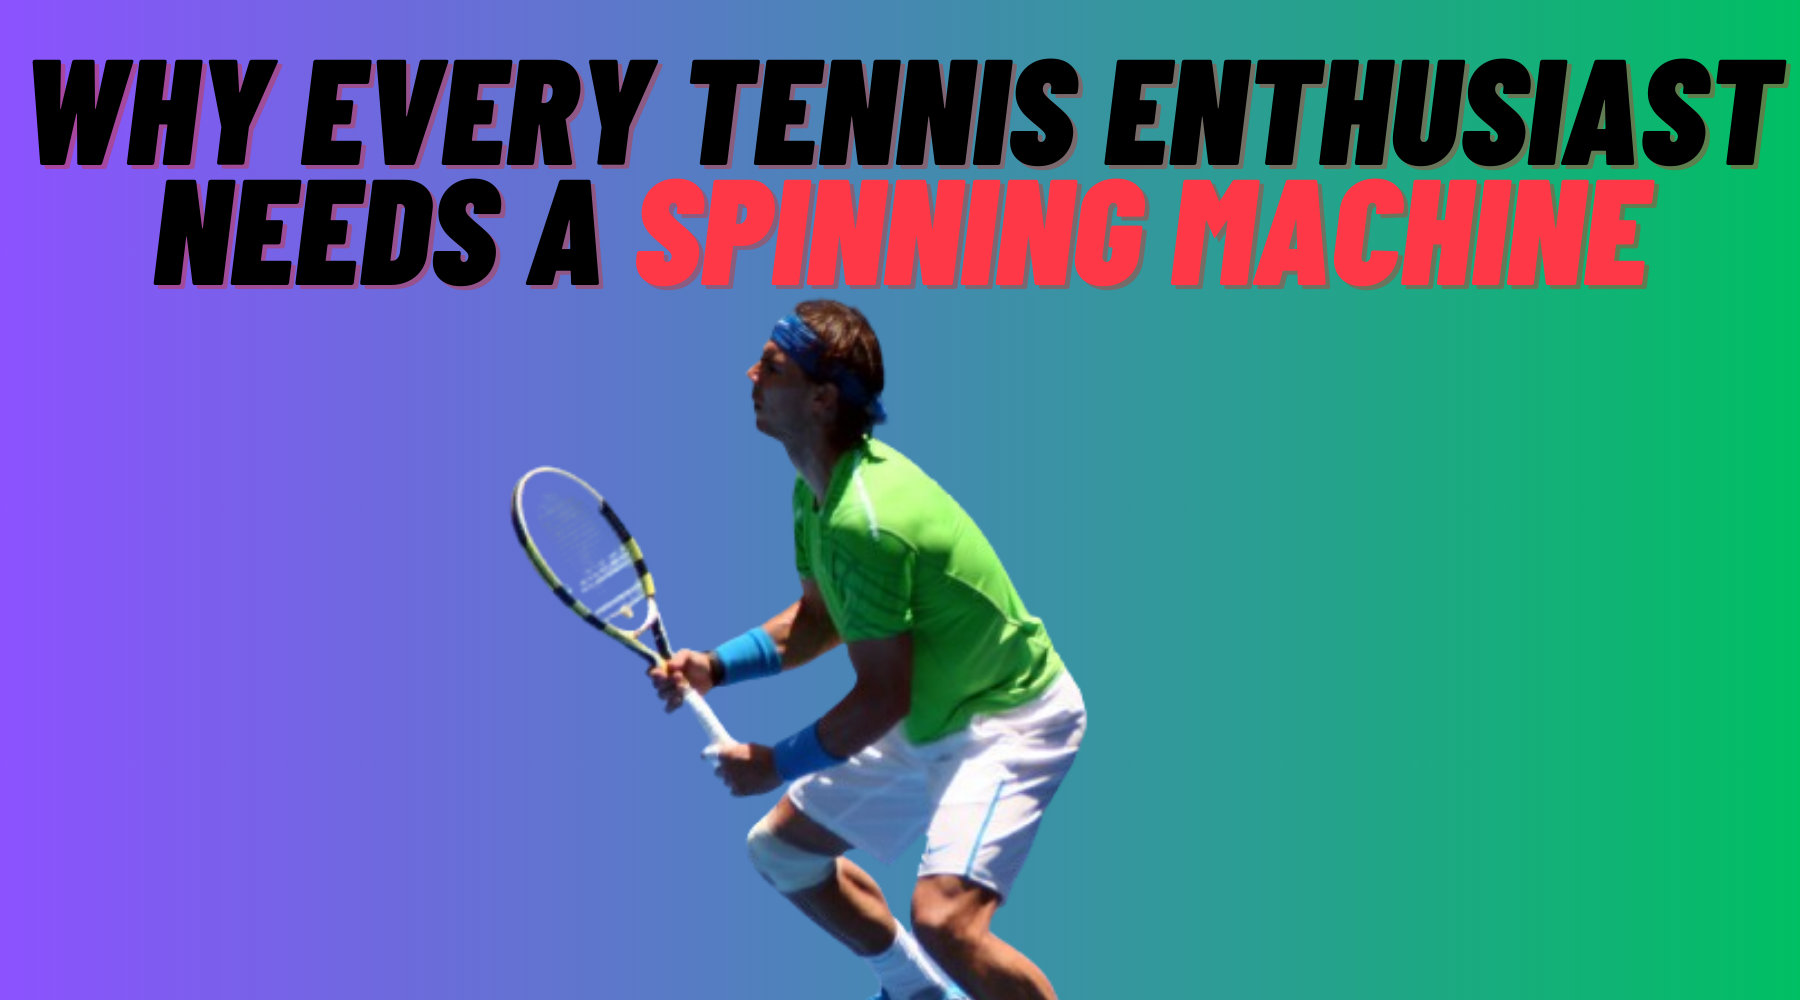 Why Every Tennis Enthusiast Needs a Spinning Machine